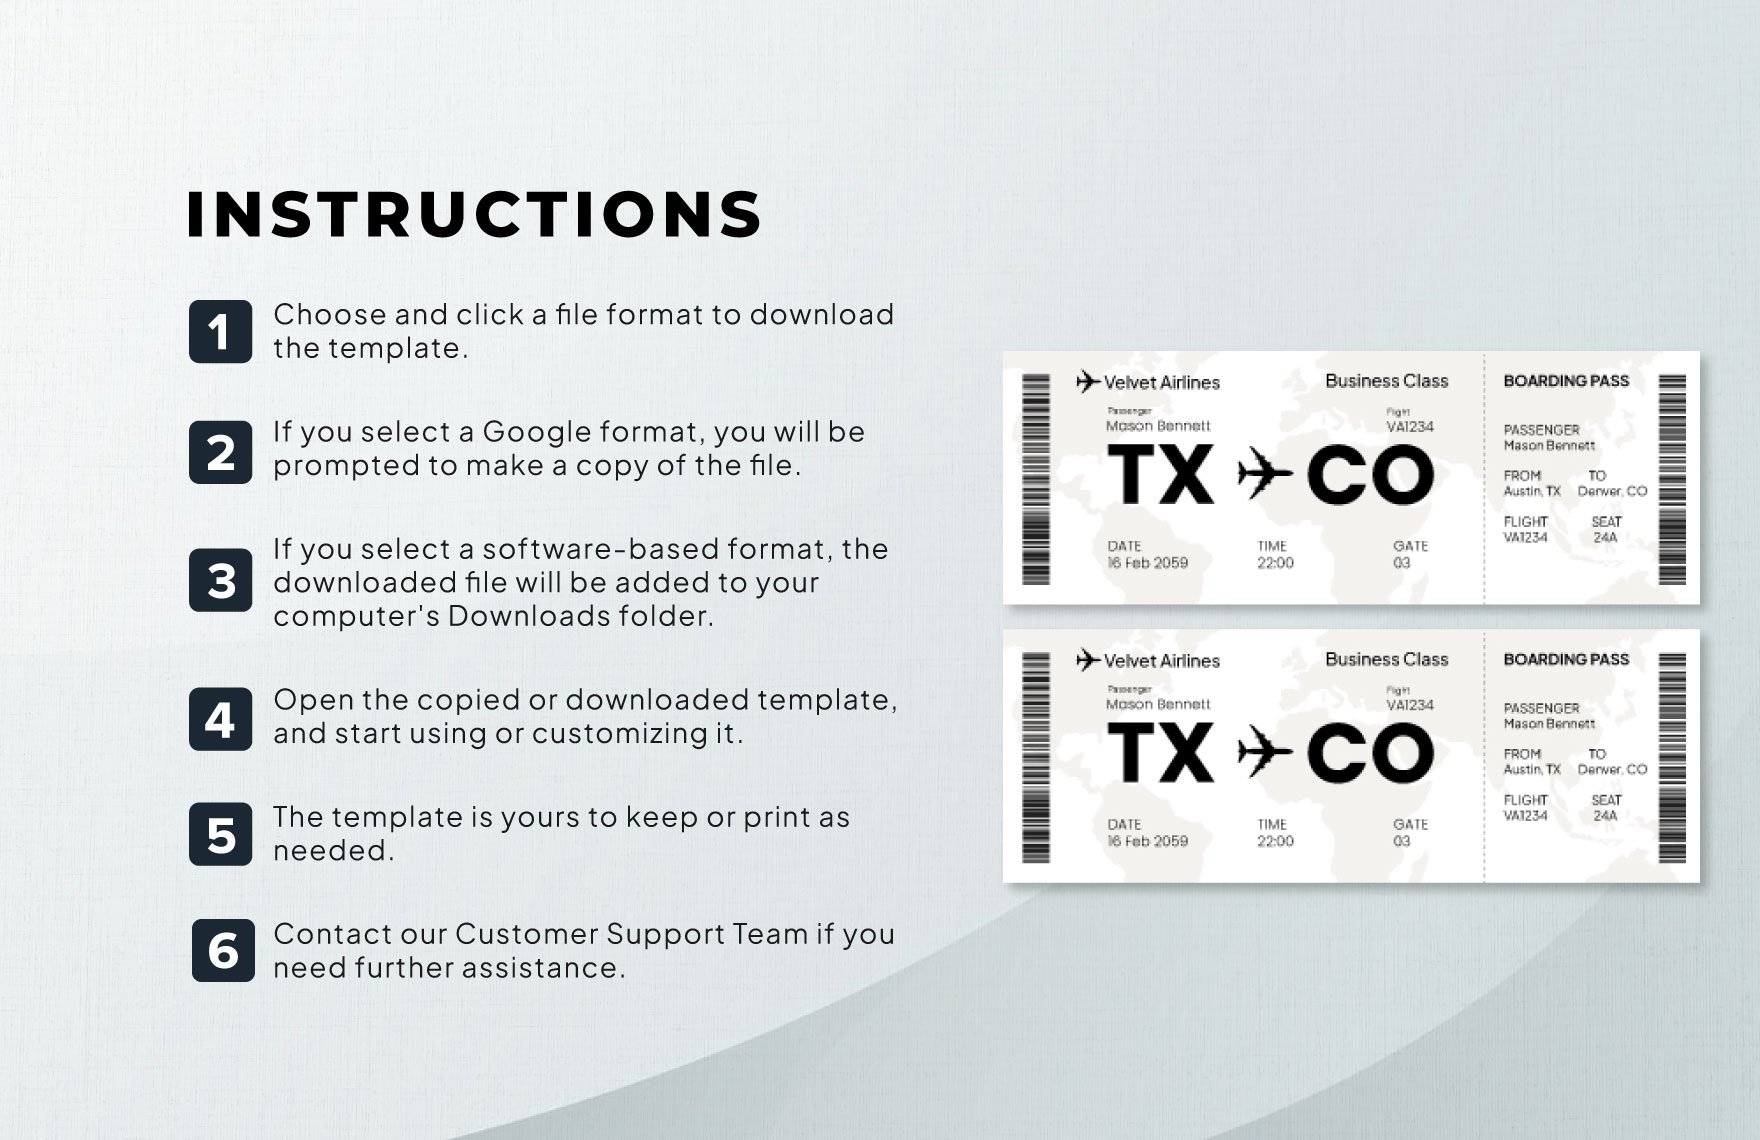 Business Airline Ticket Template